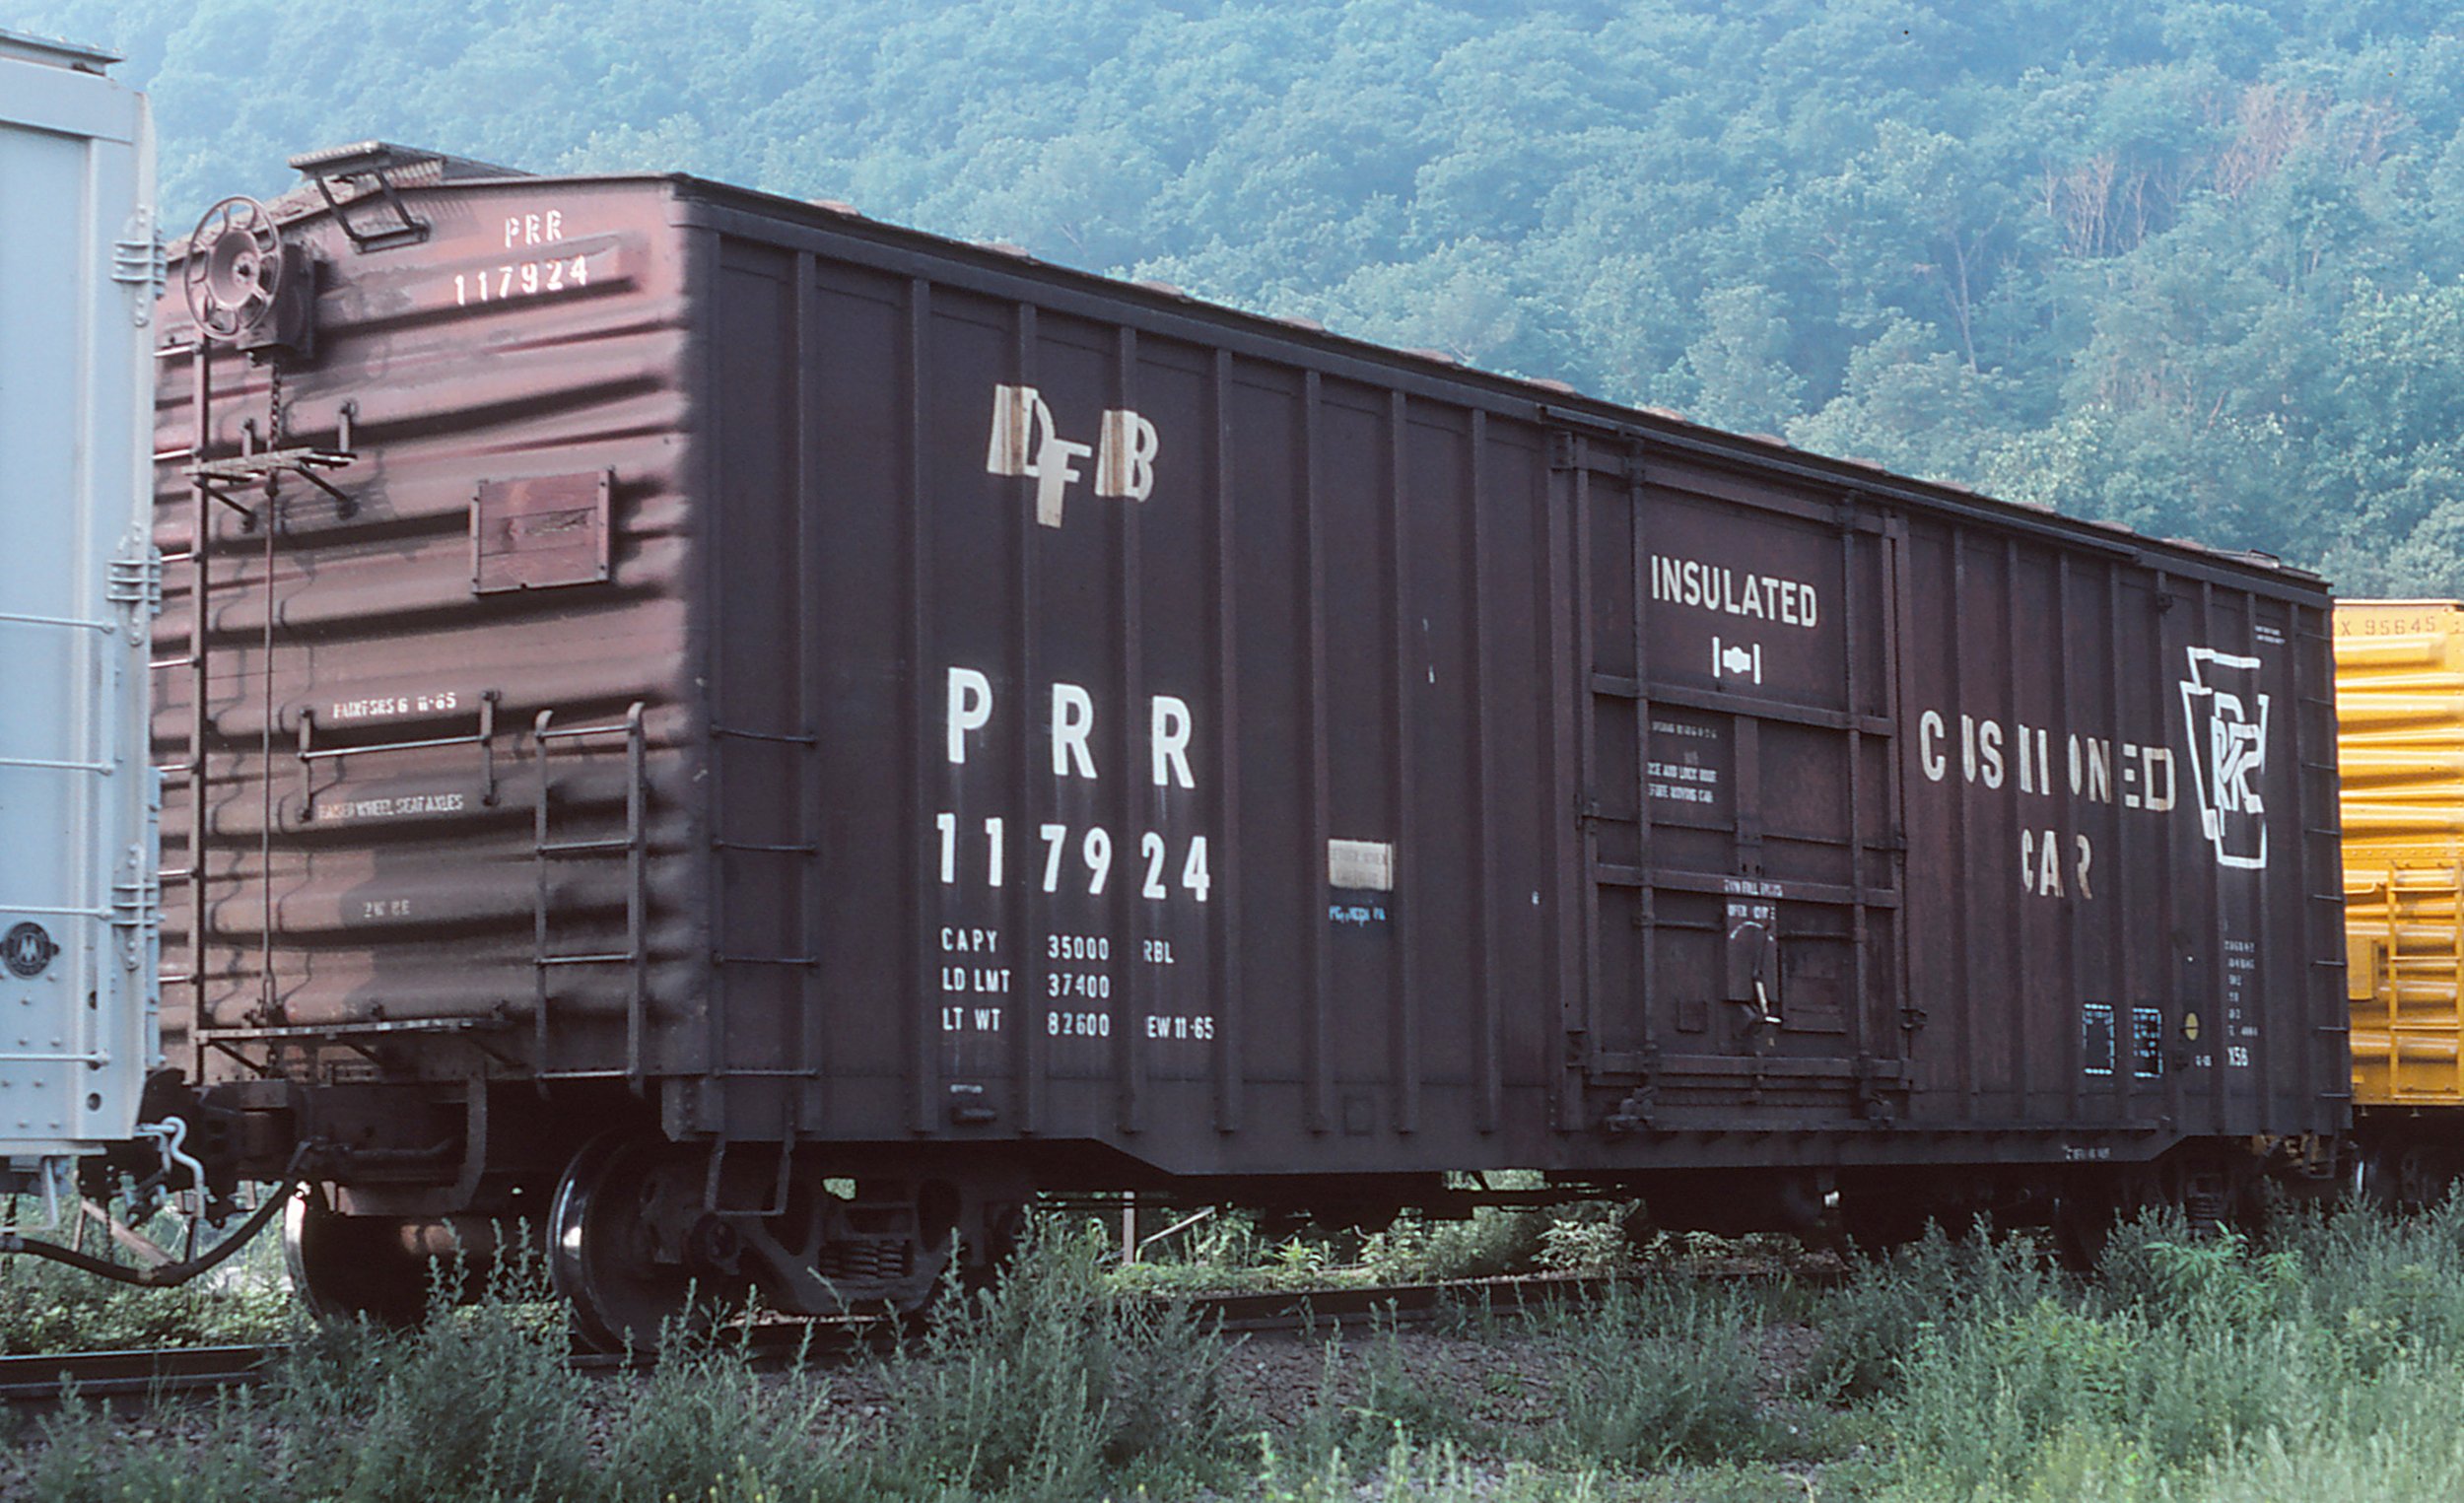  June 1979 in Marysville, PA - Jeff Weaver collection (PRR 117924 shown) 